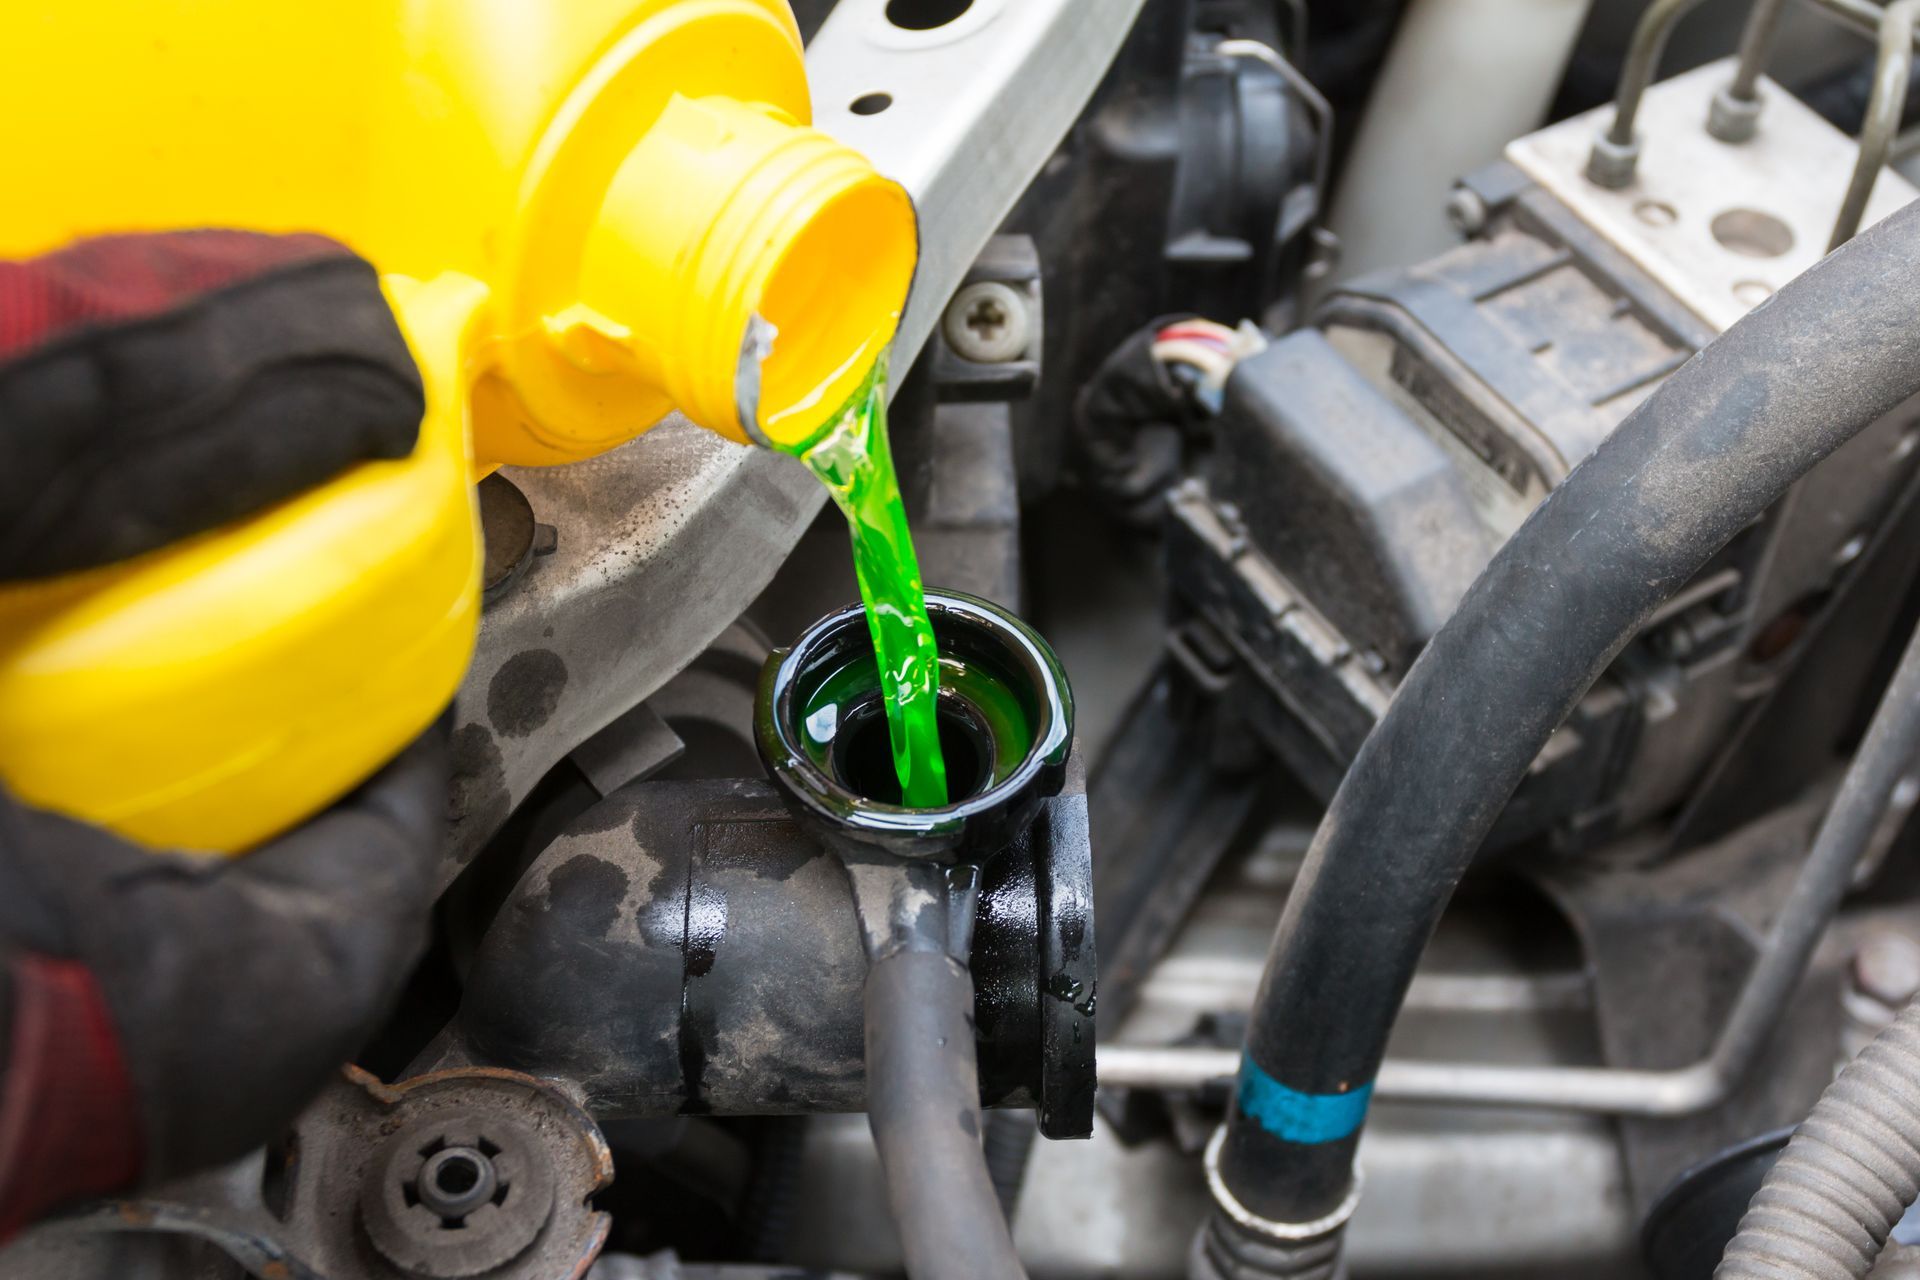 Coolant & Antifreeze at ﻿Ryan's Auto Care﻿ in ﻿Lake Mills, WI﻿